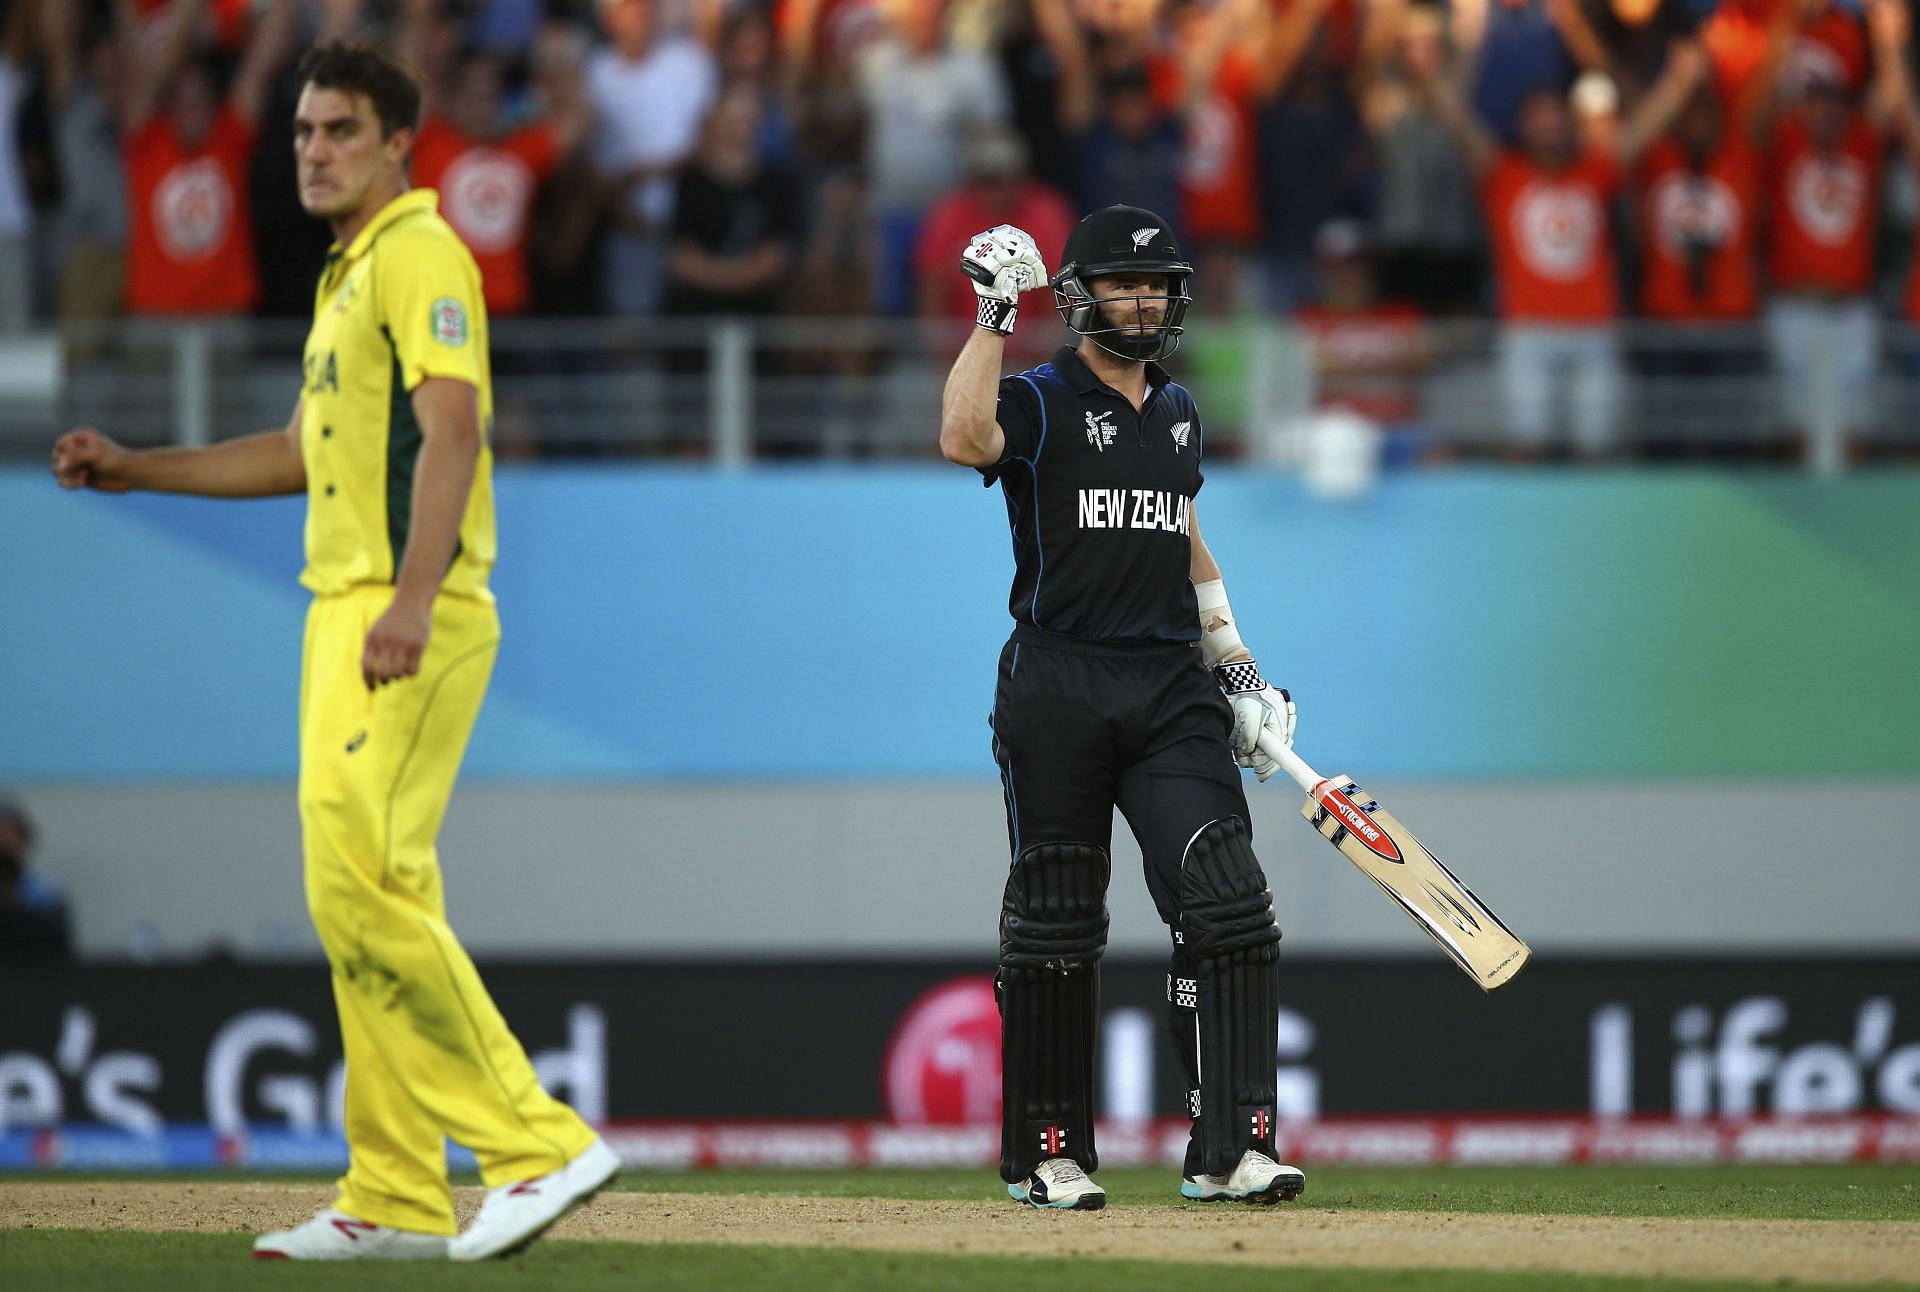 Kane Williamson remained composed despite the regular fall of wickets at the other end